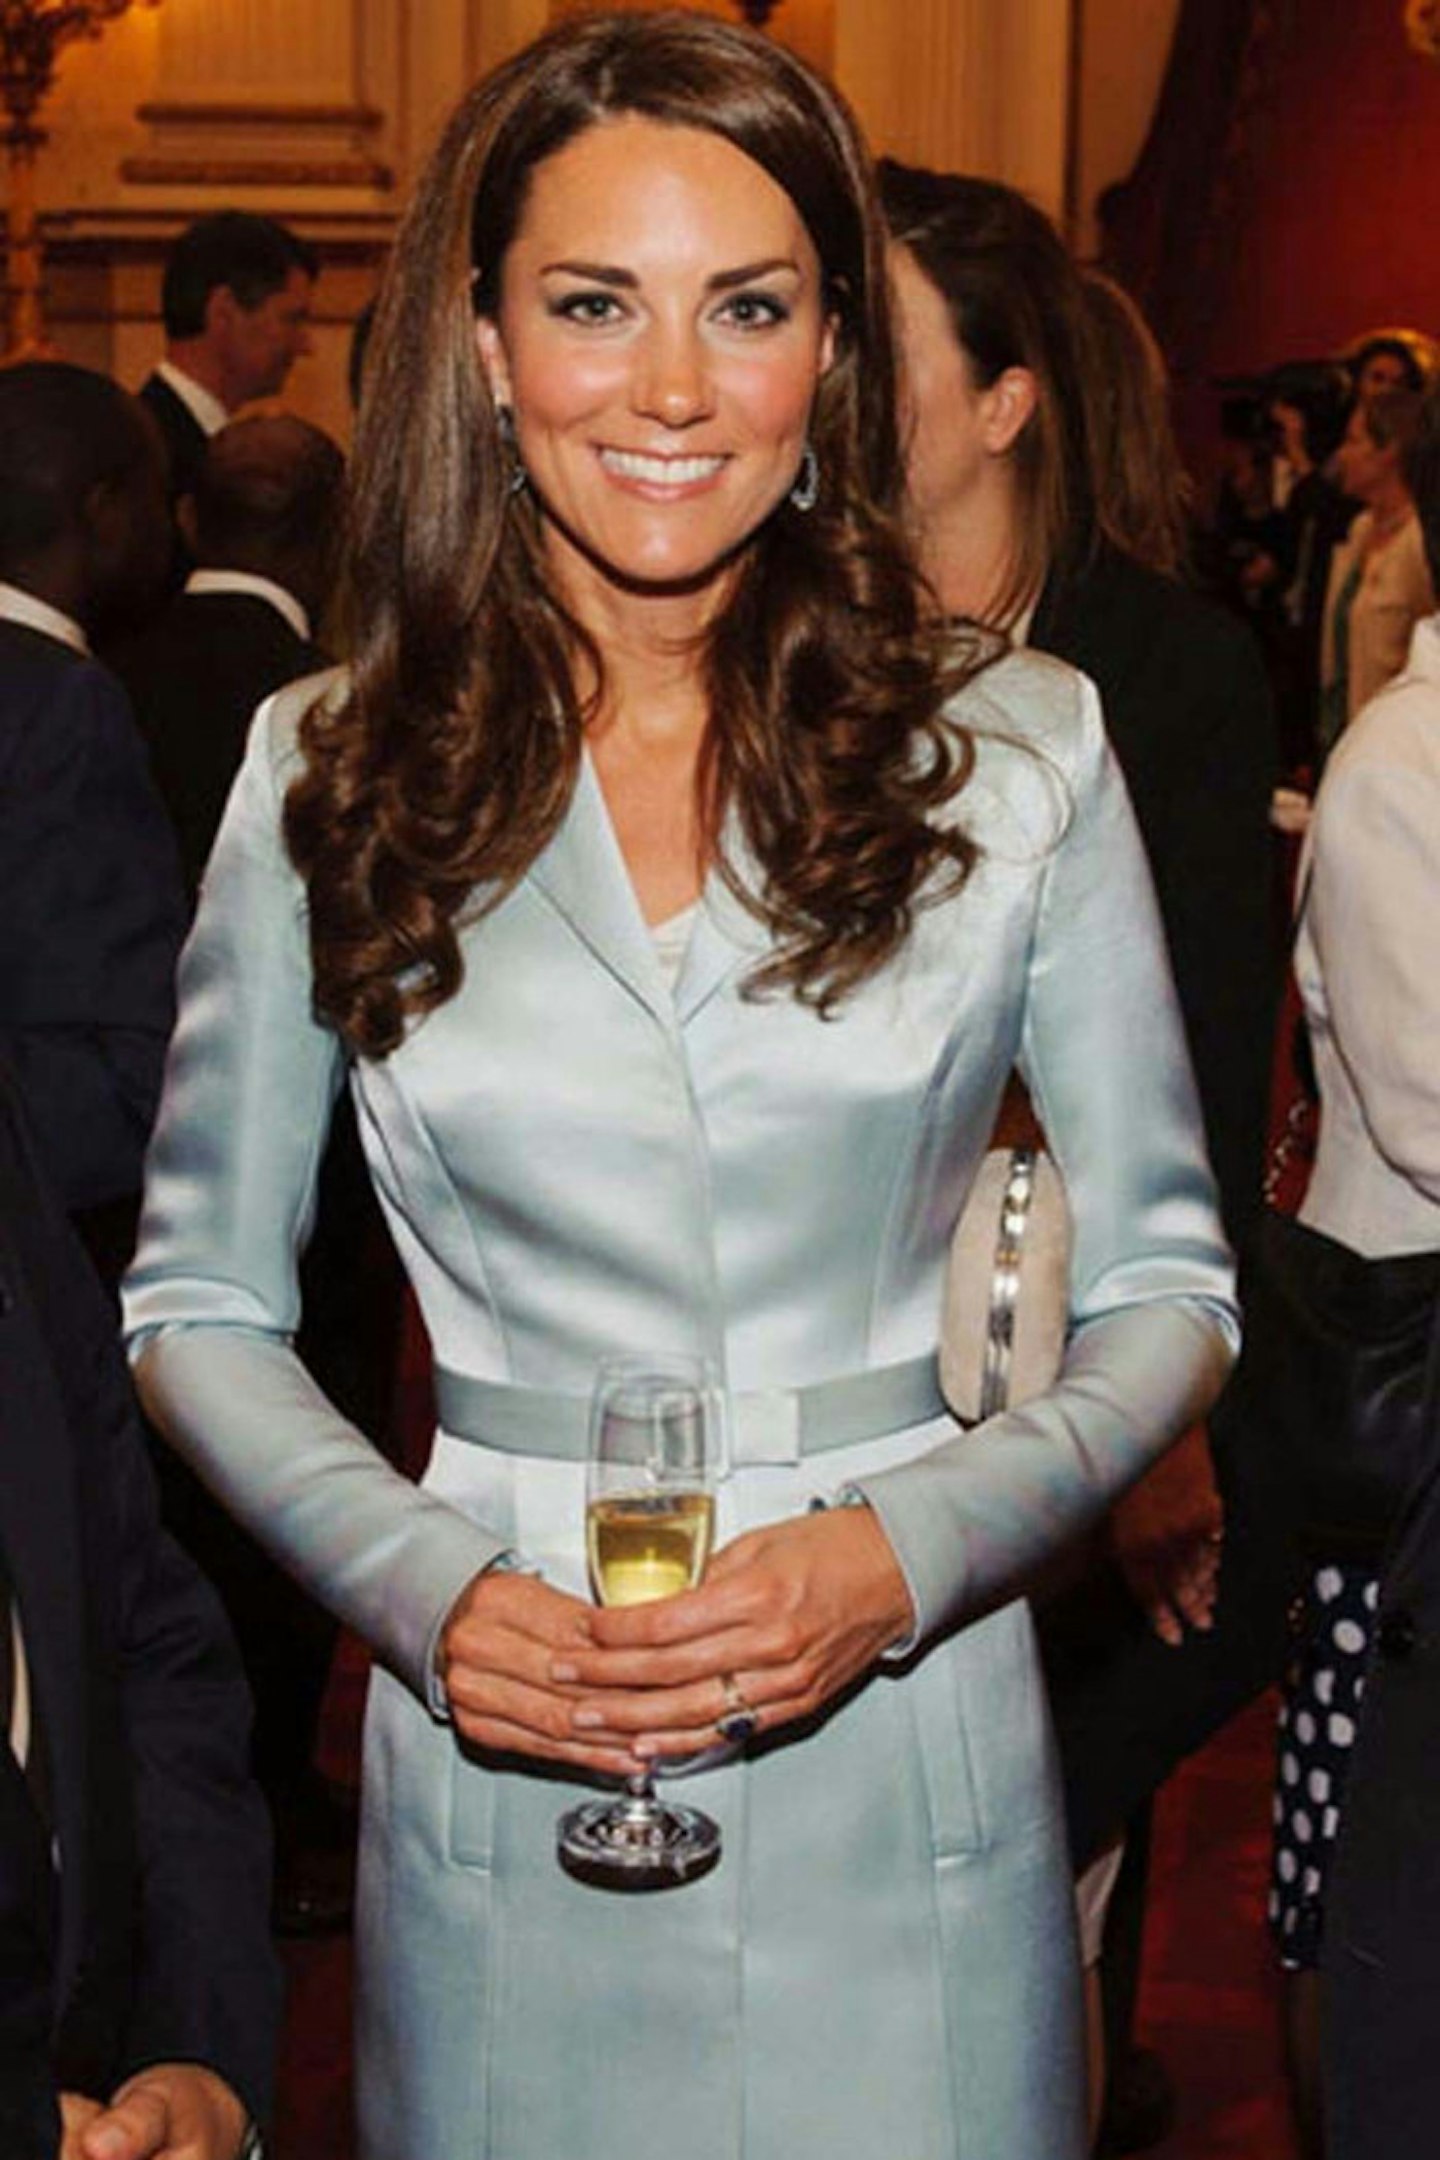 Kate Middleton in Christopher Kane, 2012 Olympic Games Opening Ceremony, 27 July 2012